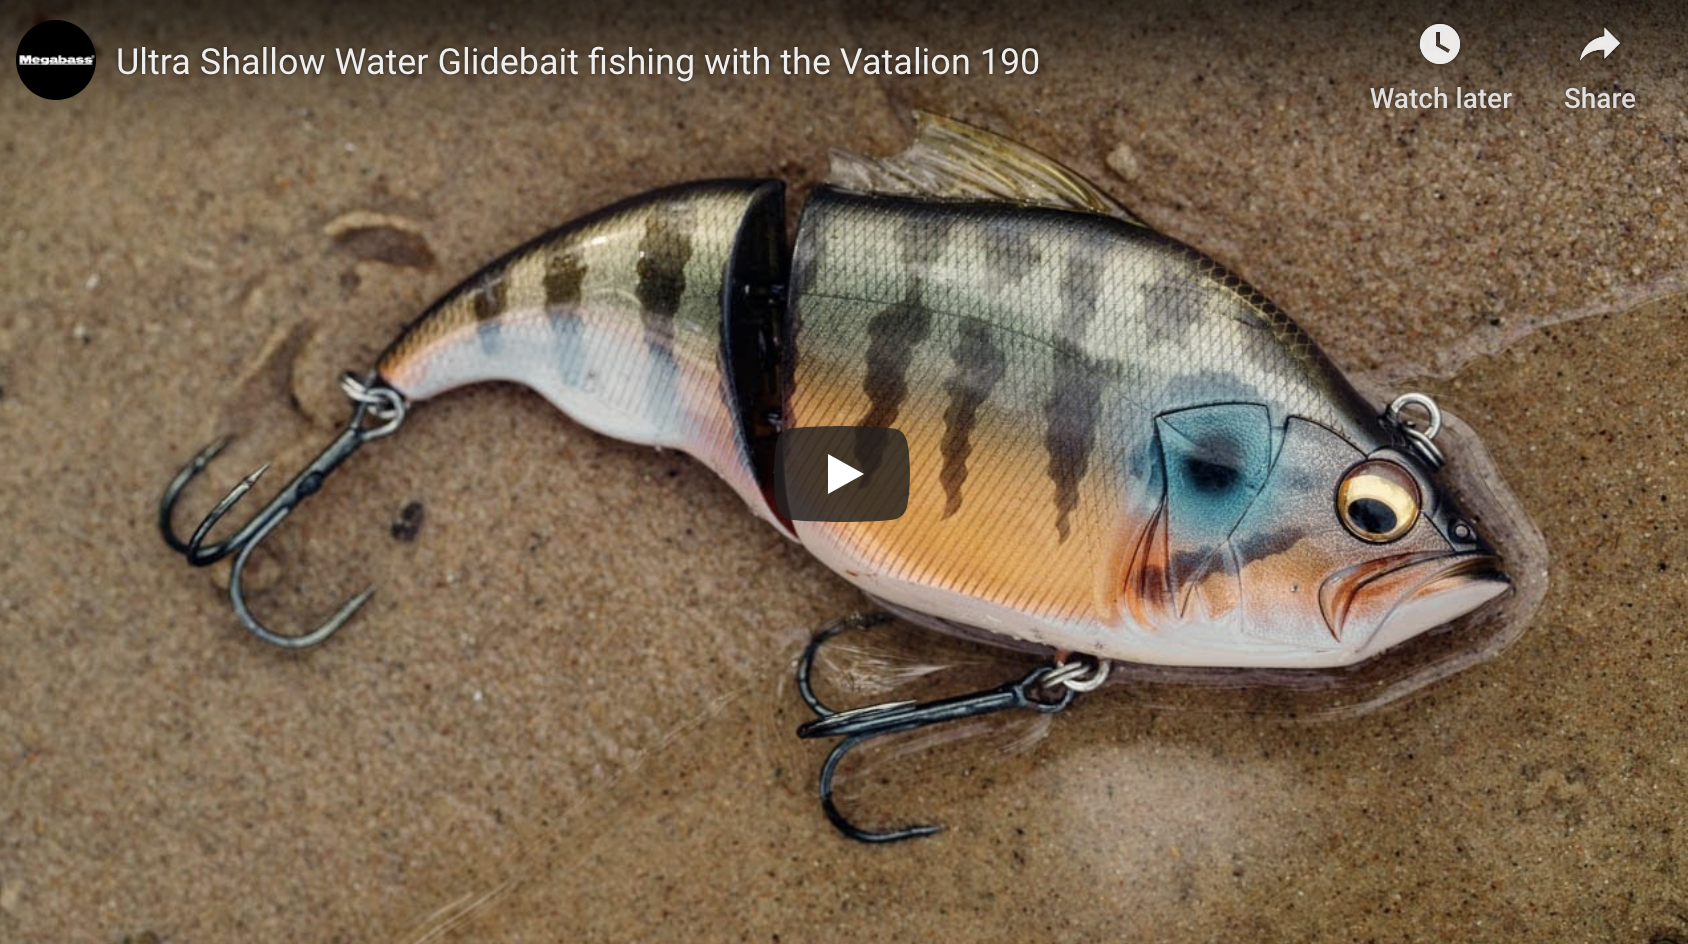 Ultra Shallow Water Glidebait fishing with the Vatalion 190 - Megabass